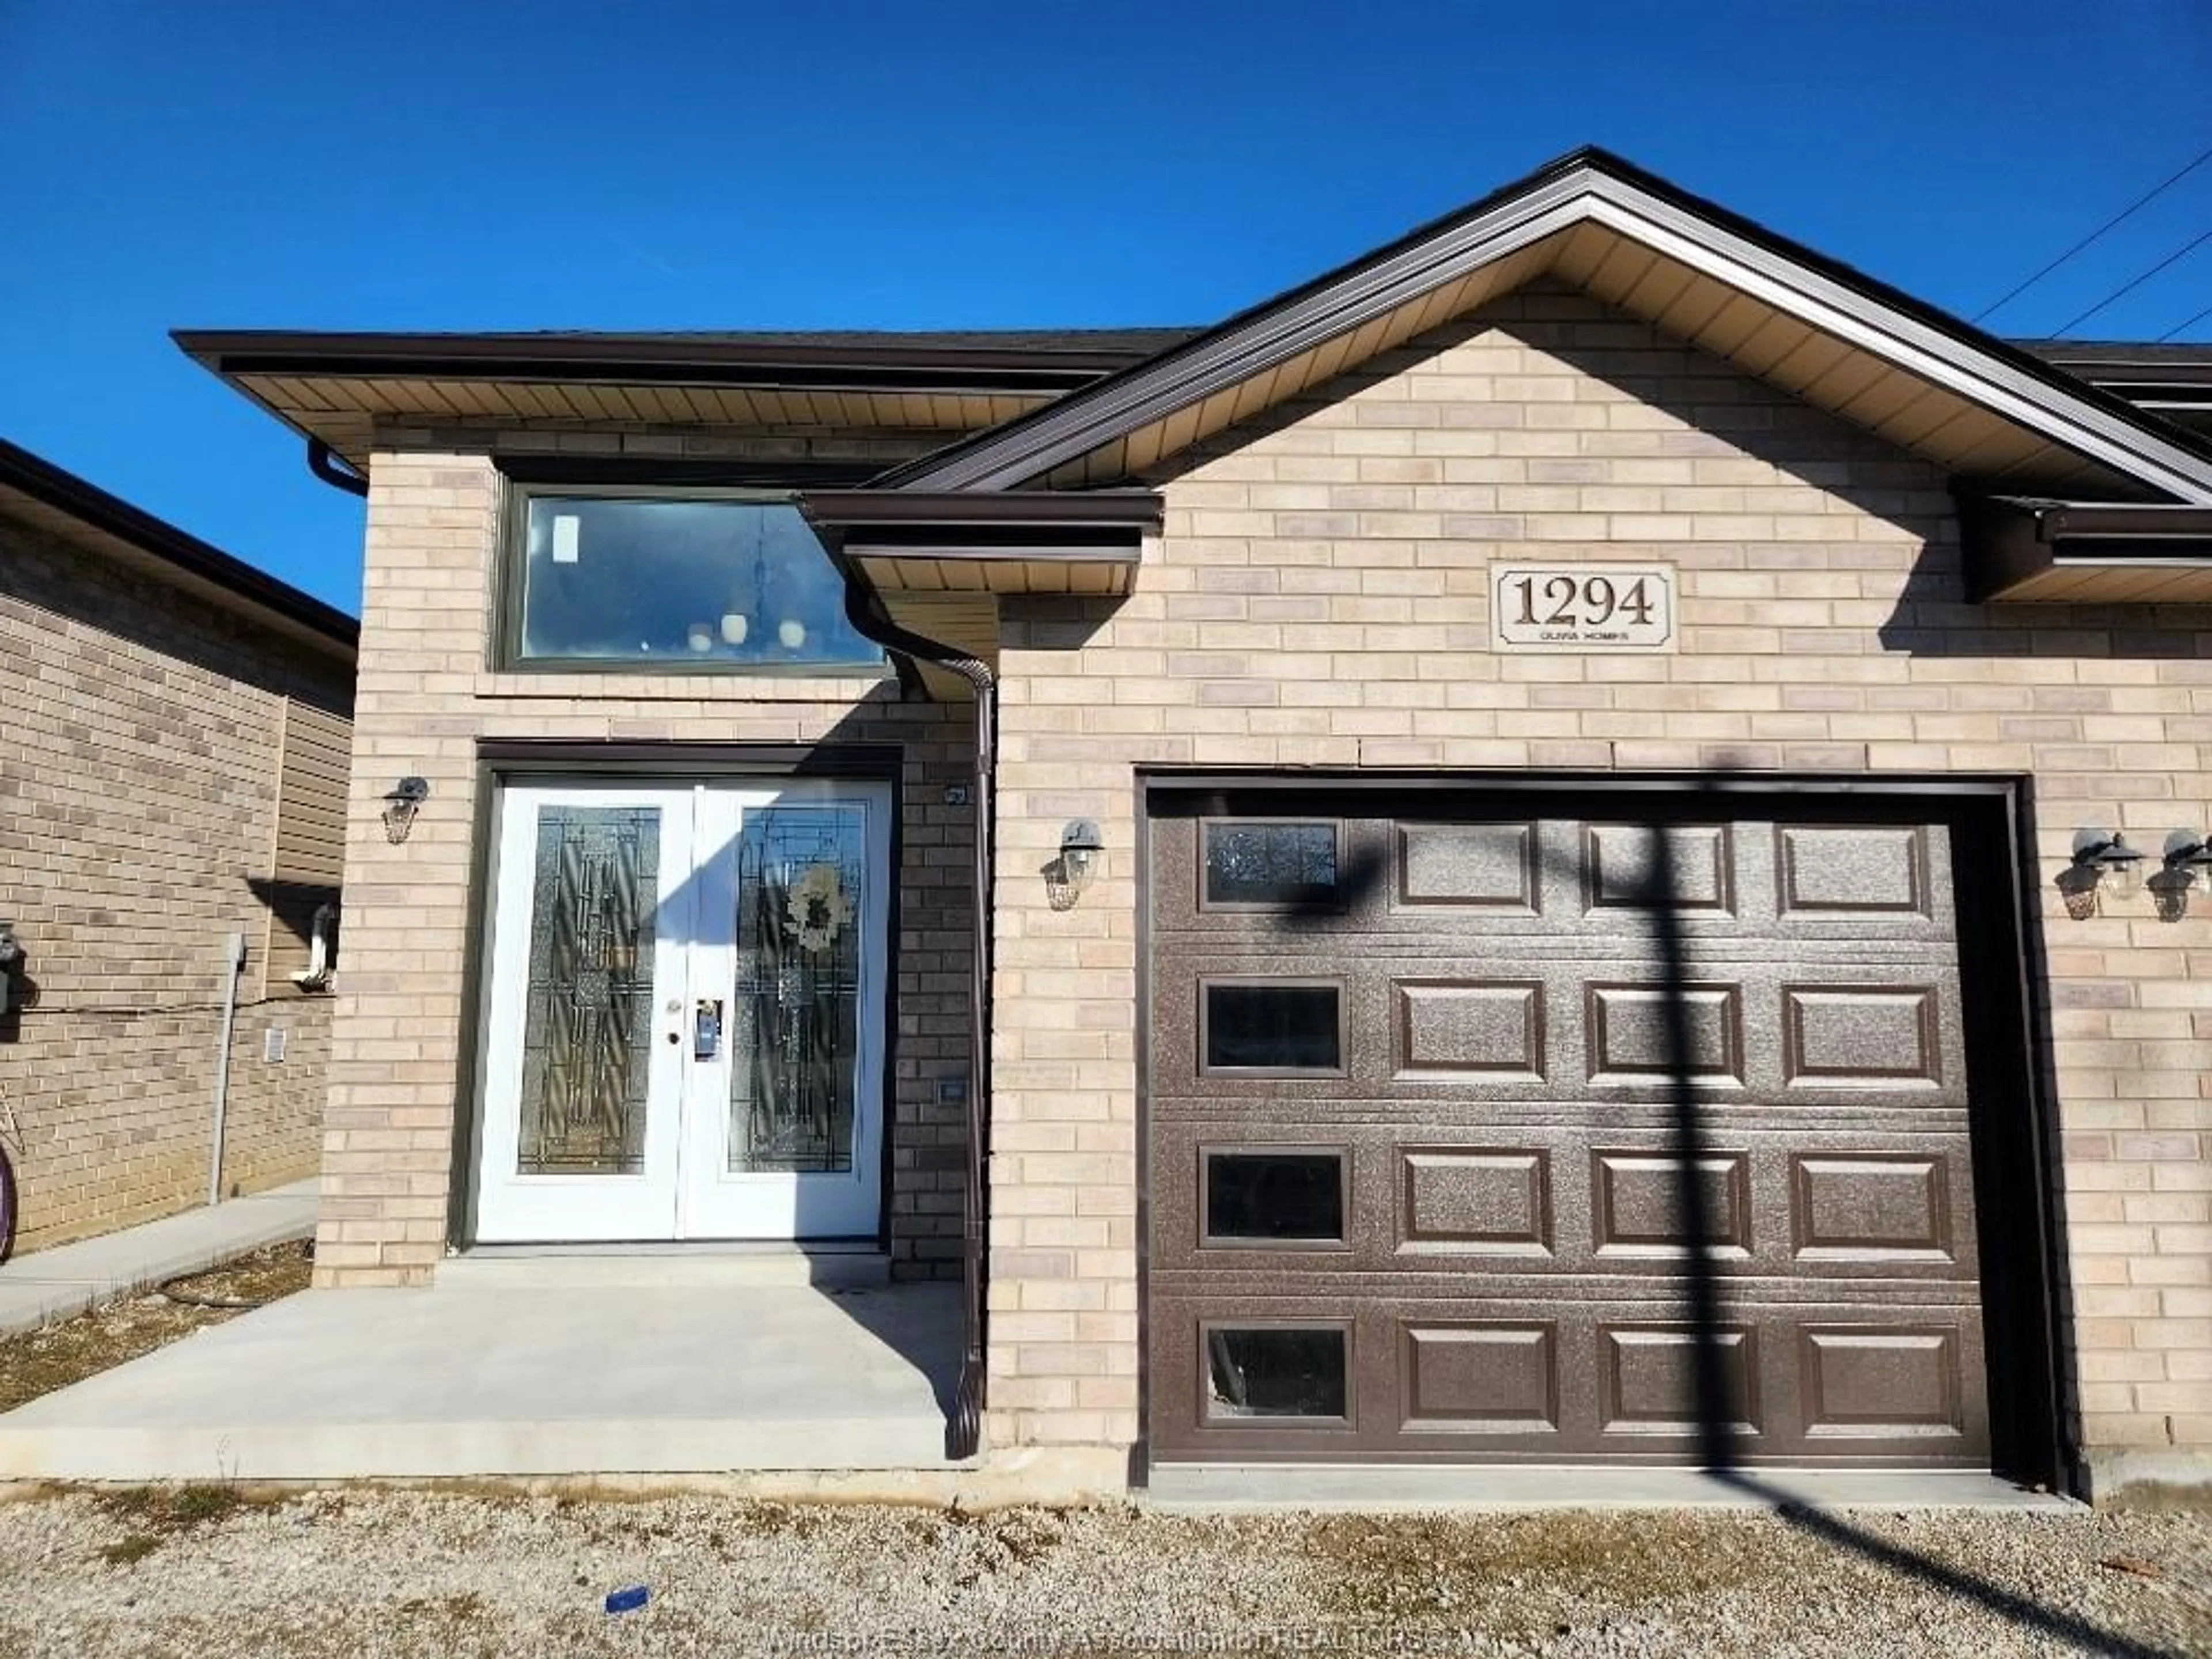 Home with brick exterior material for 1294 TOURANGEAU, Windsor Ontario N8Y 4H8